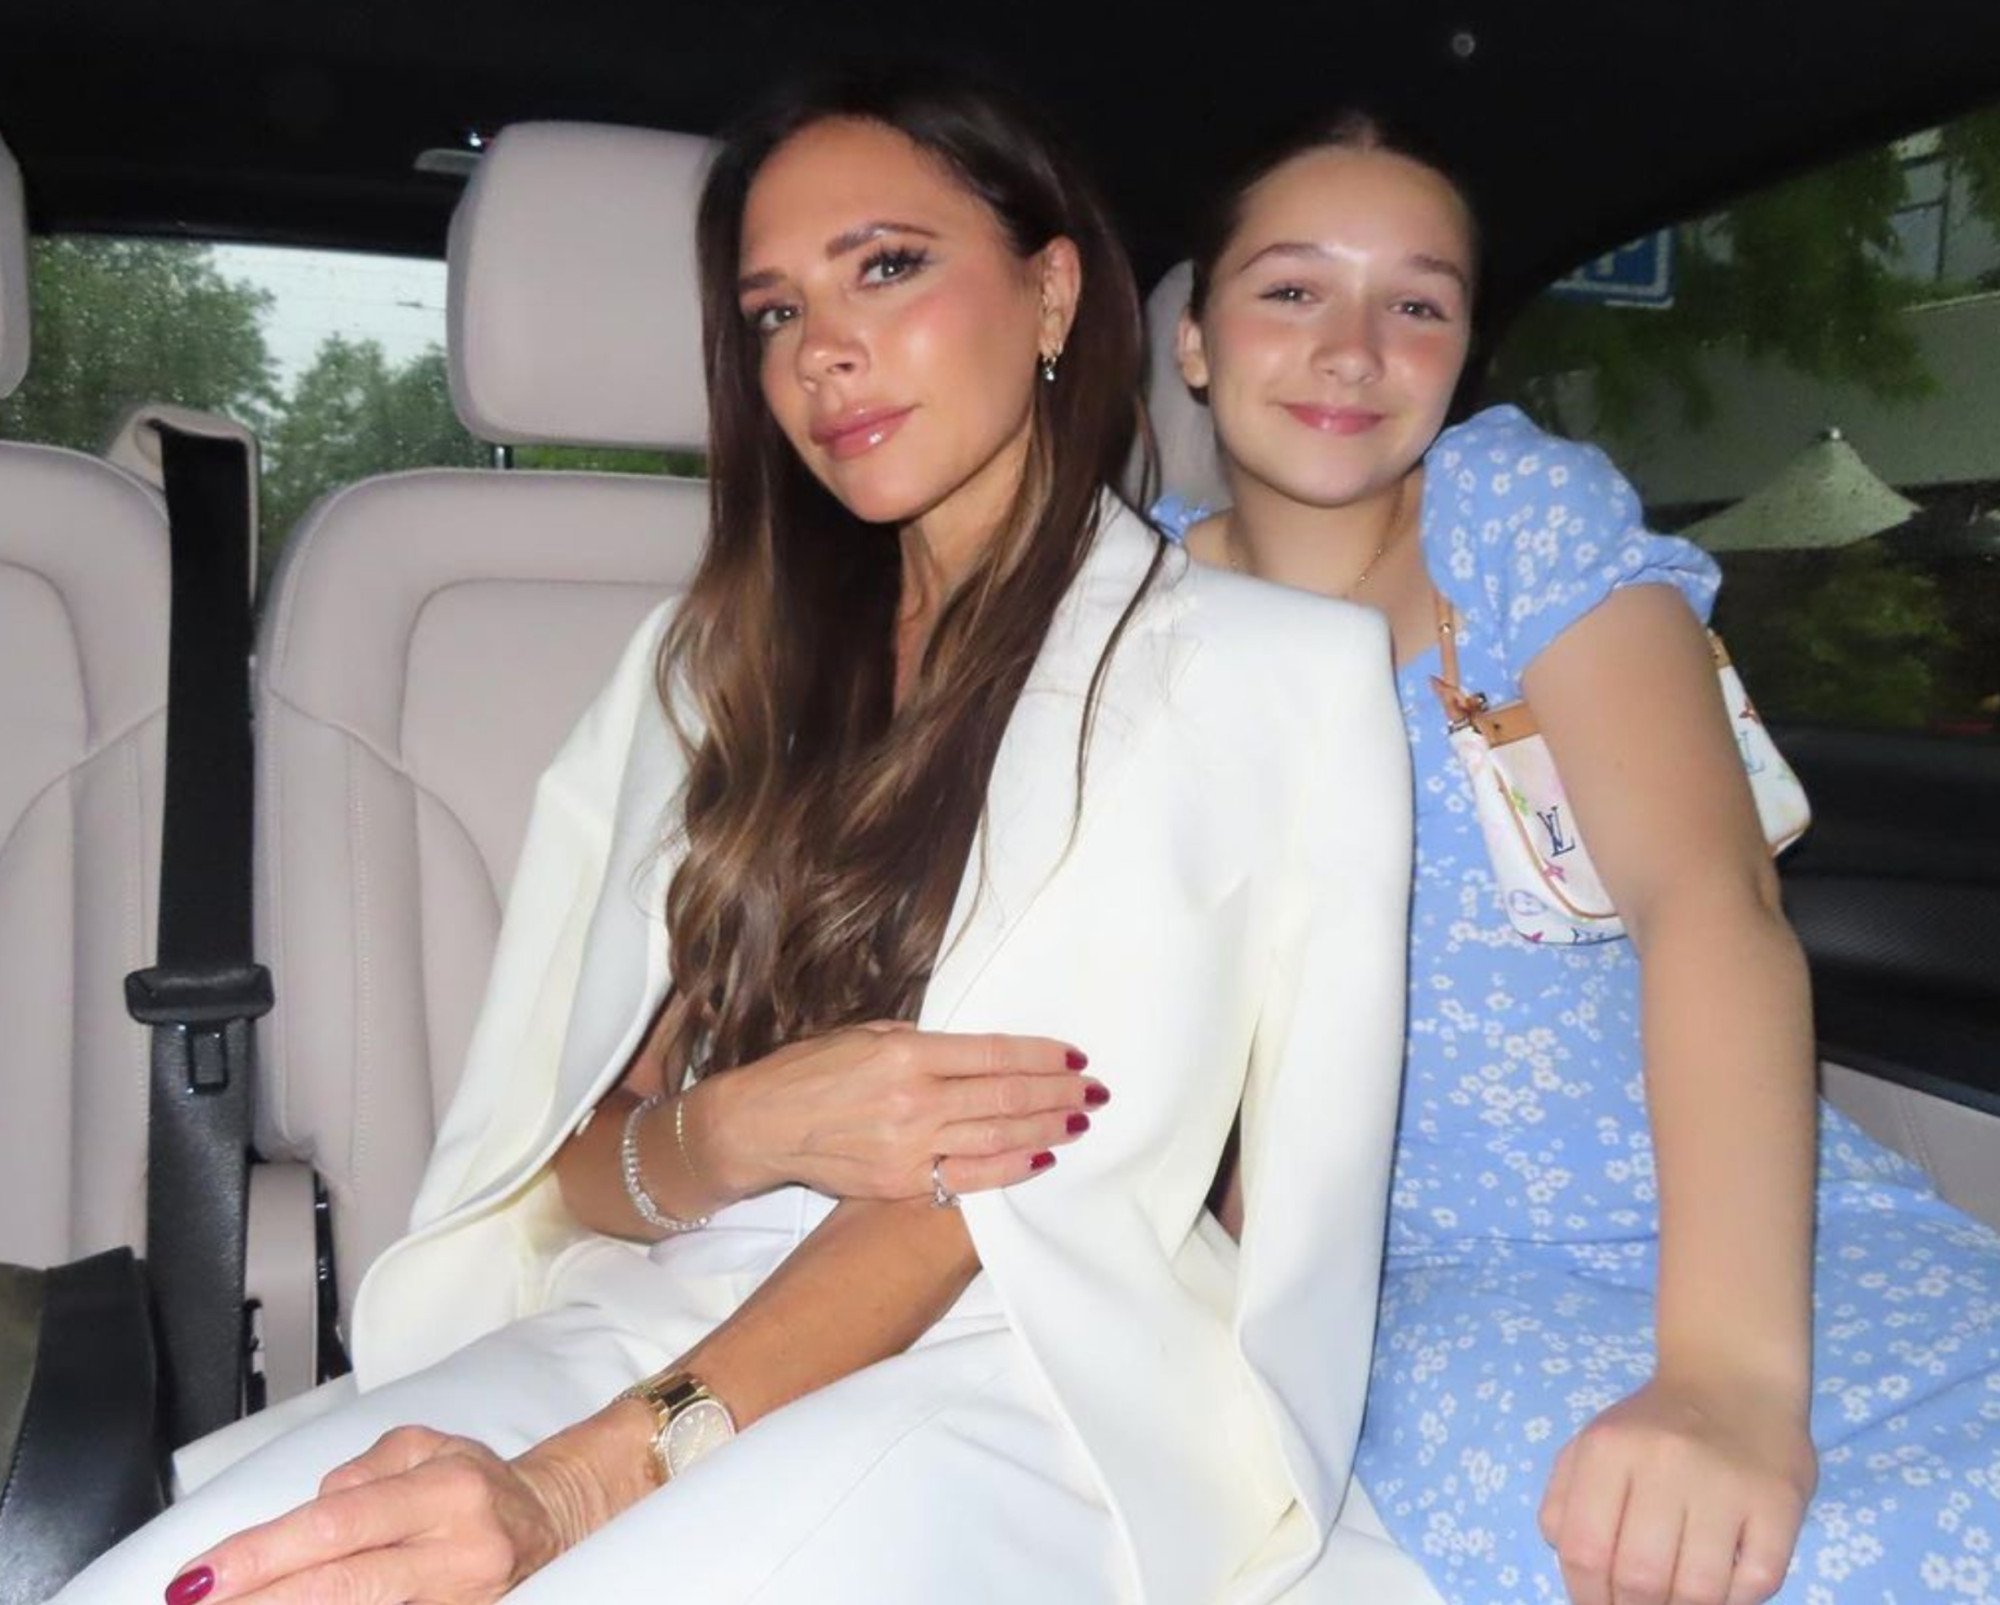 Victoria and Harper Beckham's 10 best fashion moments together: from Prada  and Louis Vuitton bags and Fashion Week dresses, to a 'J'adore Dior' tee,  the mother-daughter duo's looks are always on point